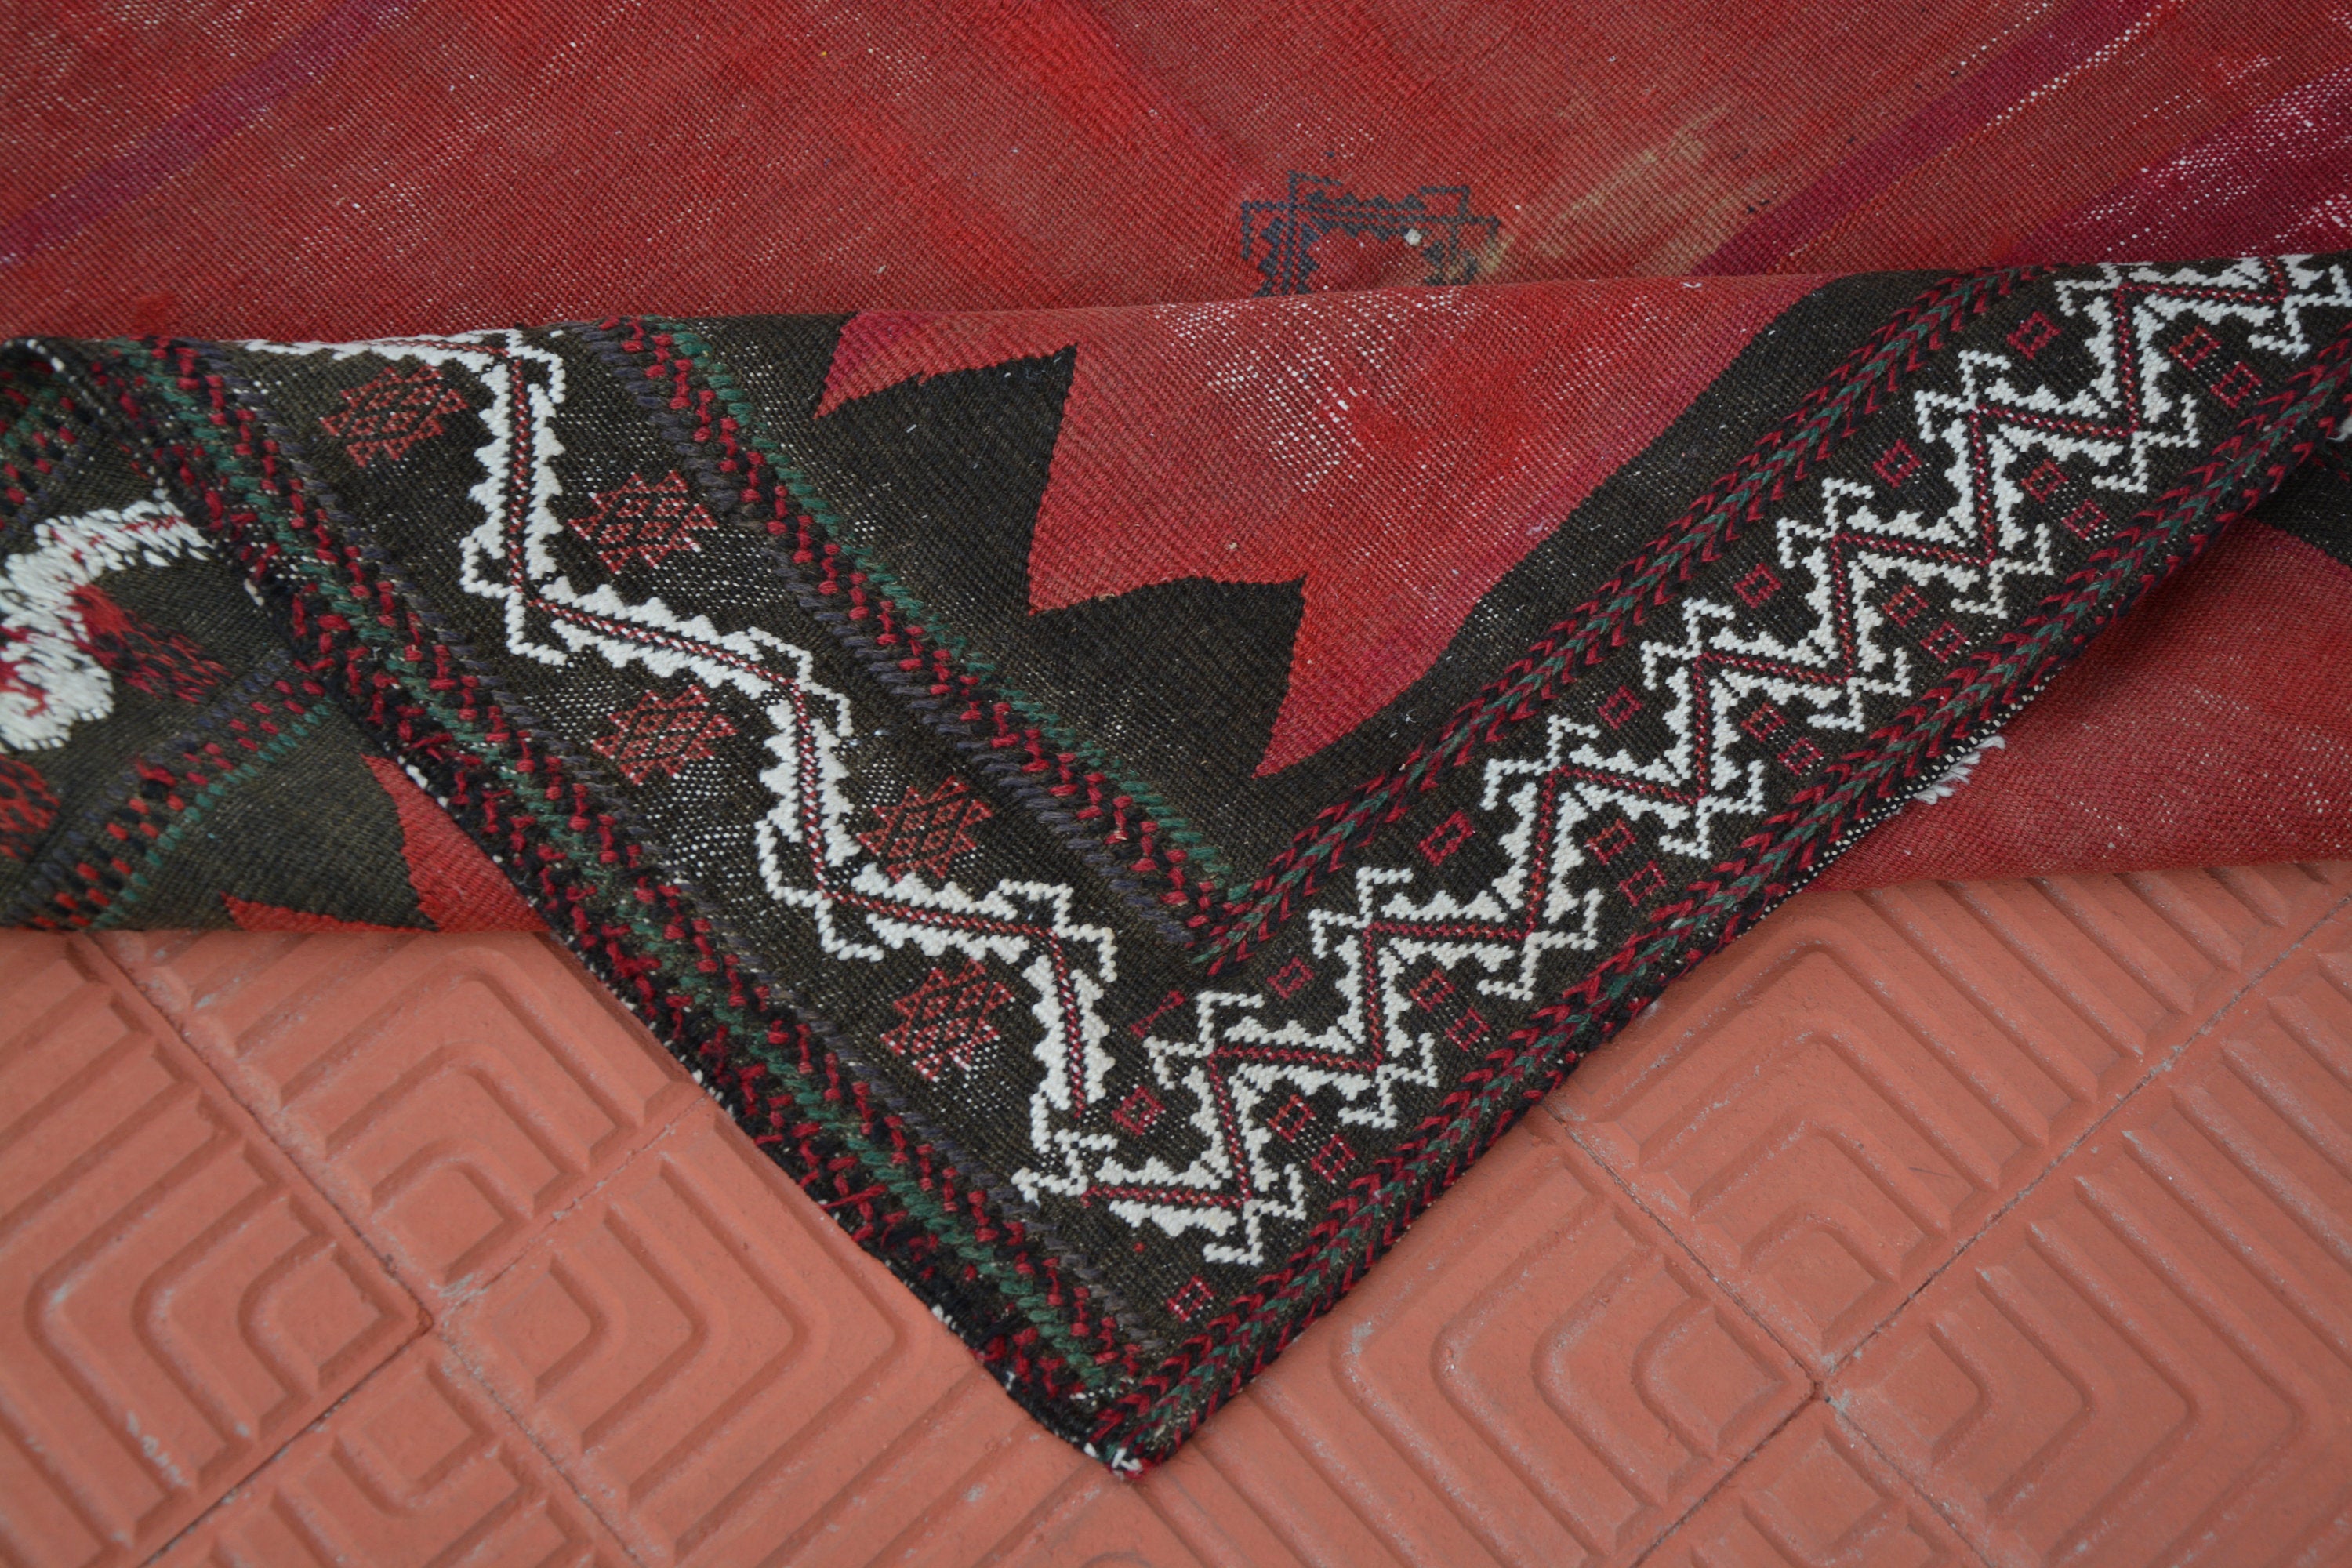 Kilim Rugs 101: Never Buy Before Knowing These – Turk Rugs